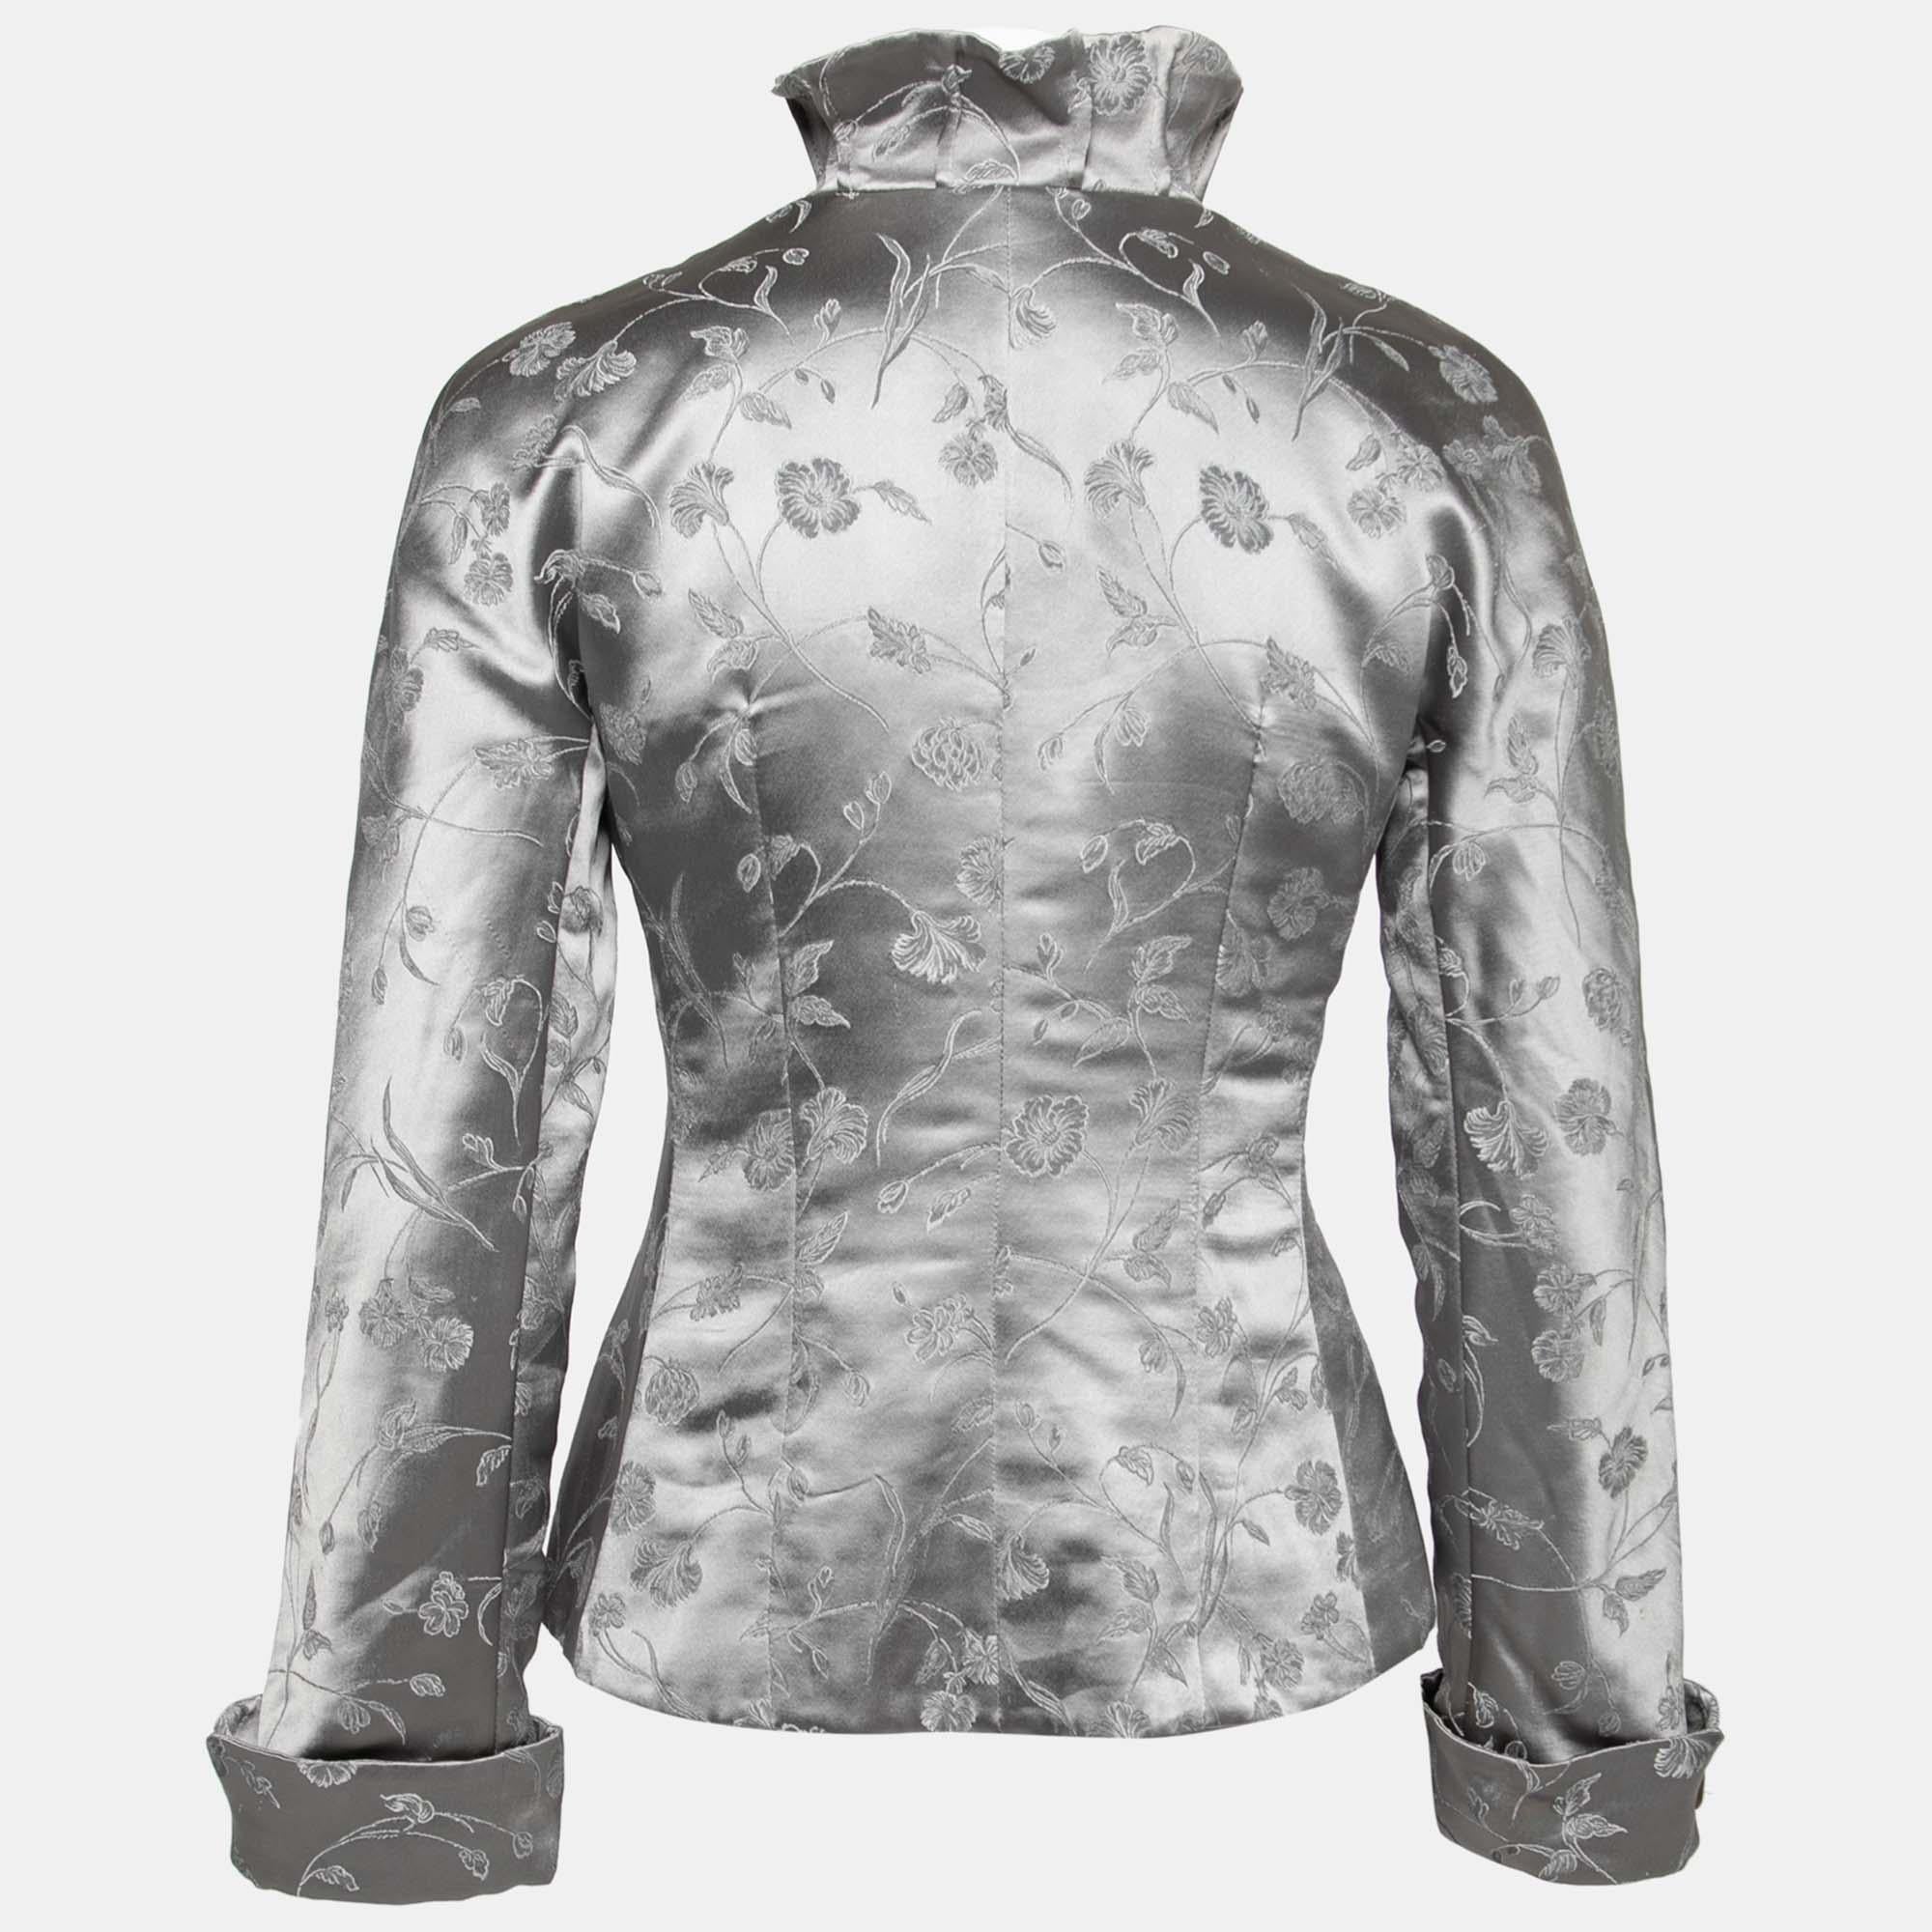 This jacket from Emporio Armani is here to make you look fashionably chic. It is tailored using grey floral-embroidered satin fabric and displays long sleeves, buttoned closures, and a high neck. Complement this jacket with black trousers and pumps